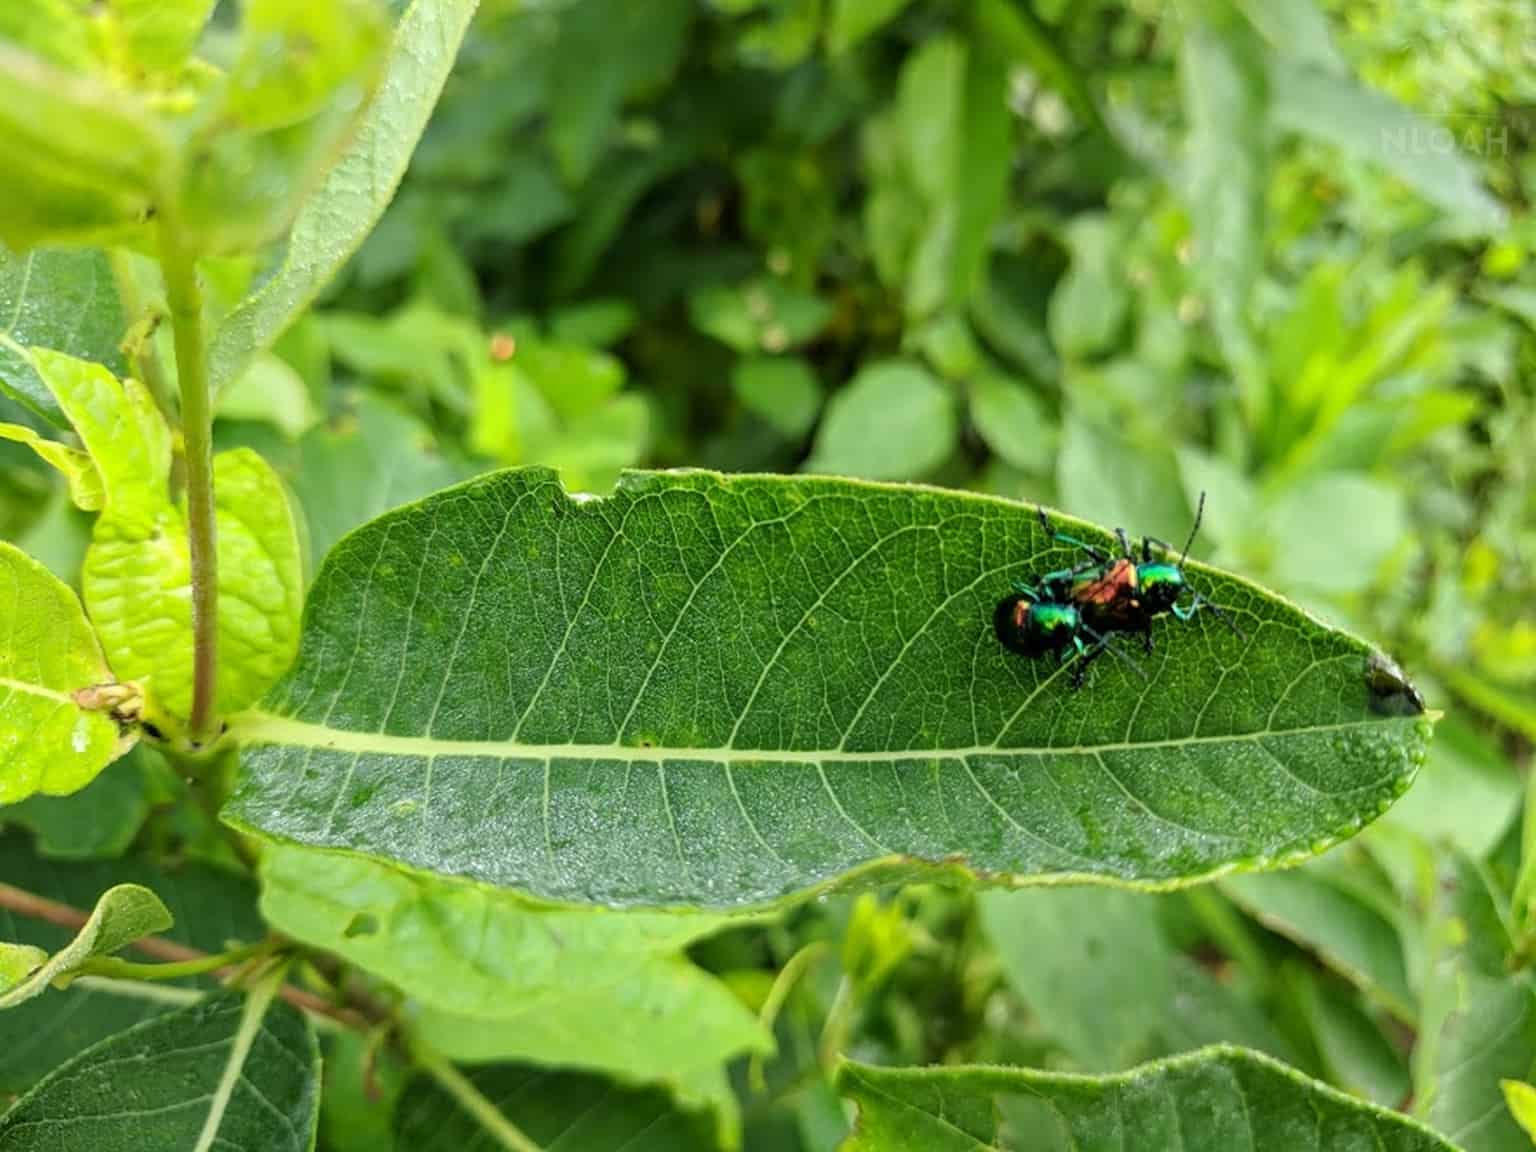 Effectiveness of Eastern Red Cedar Spray Against Japanese Beetles: What You Should Know